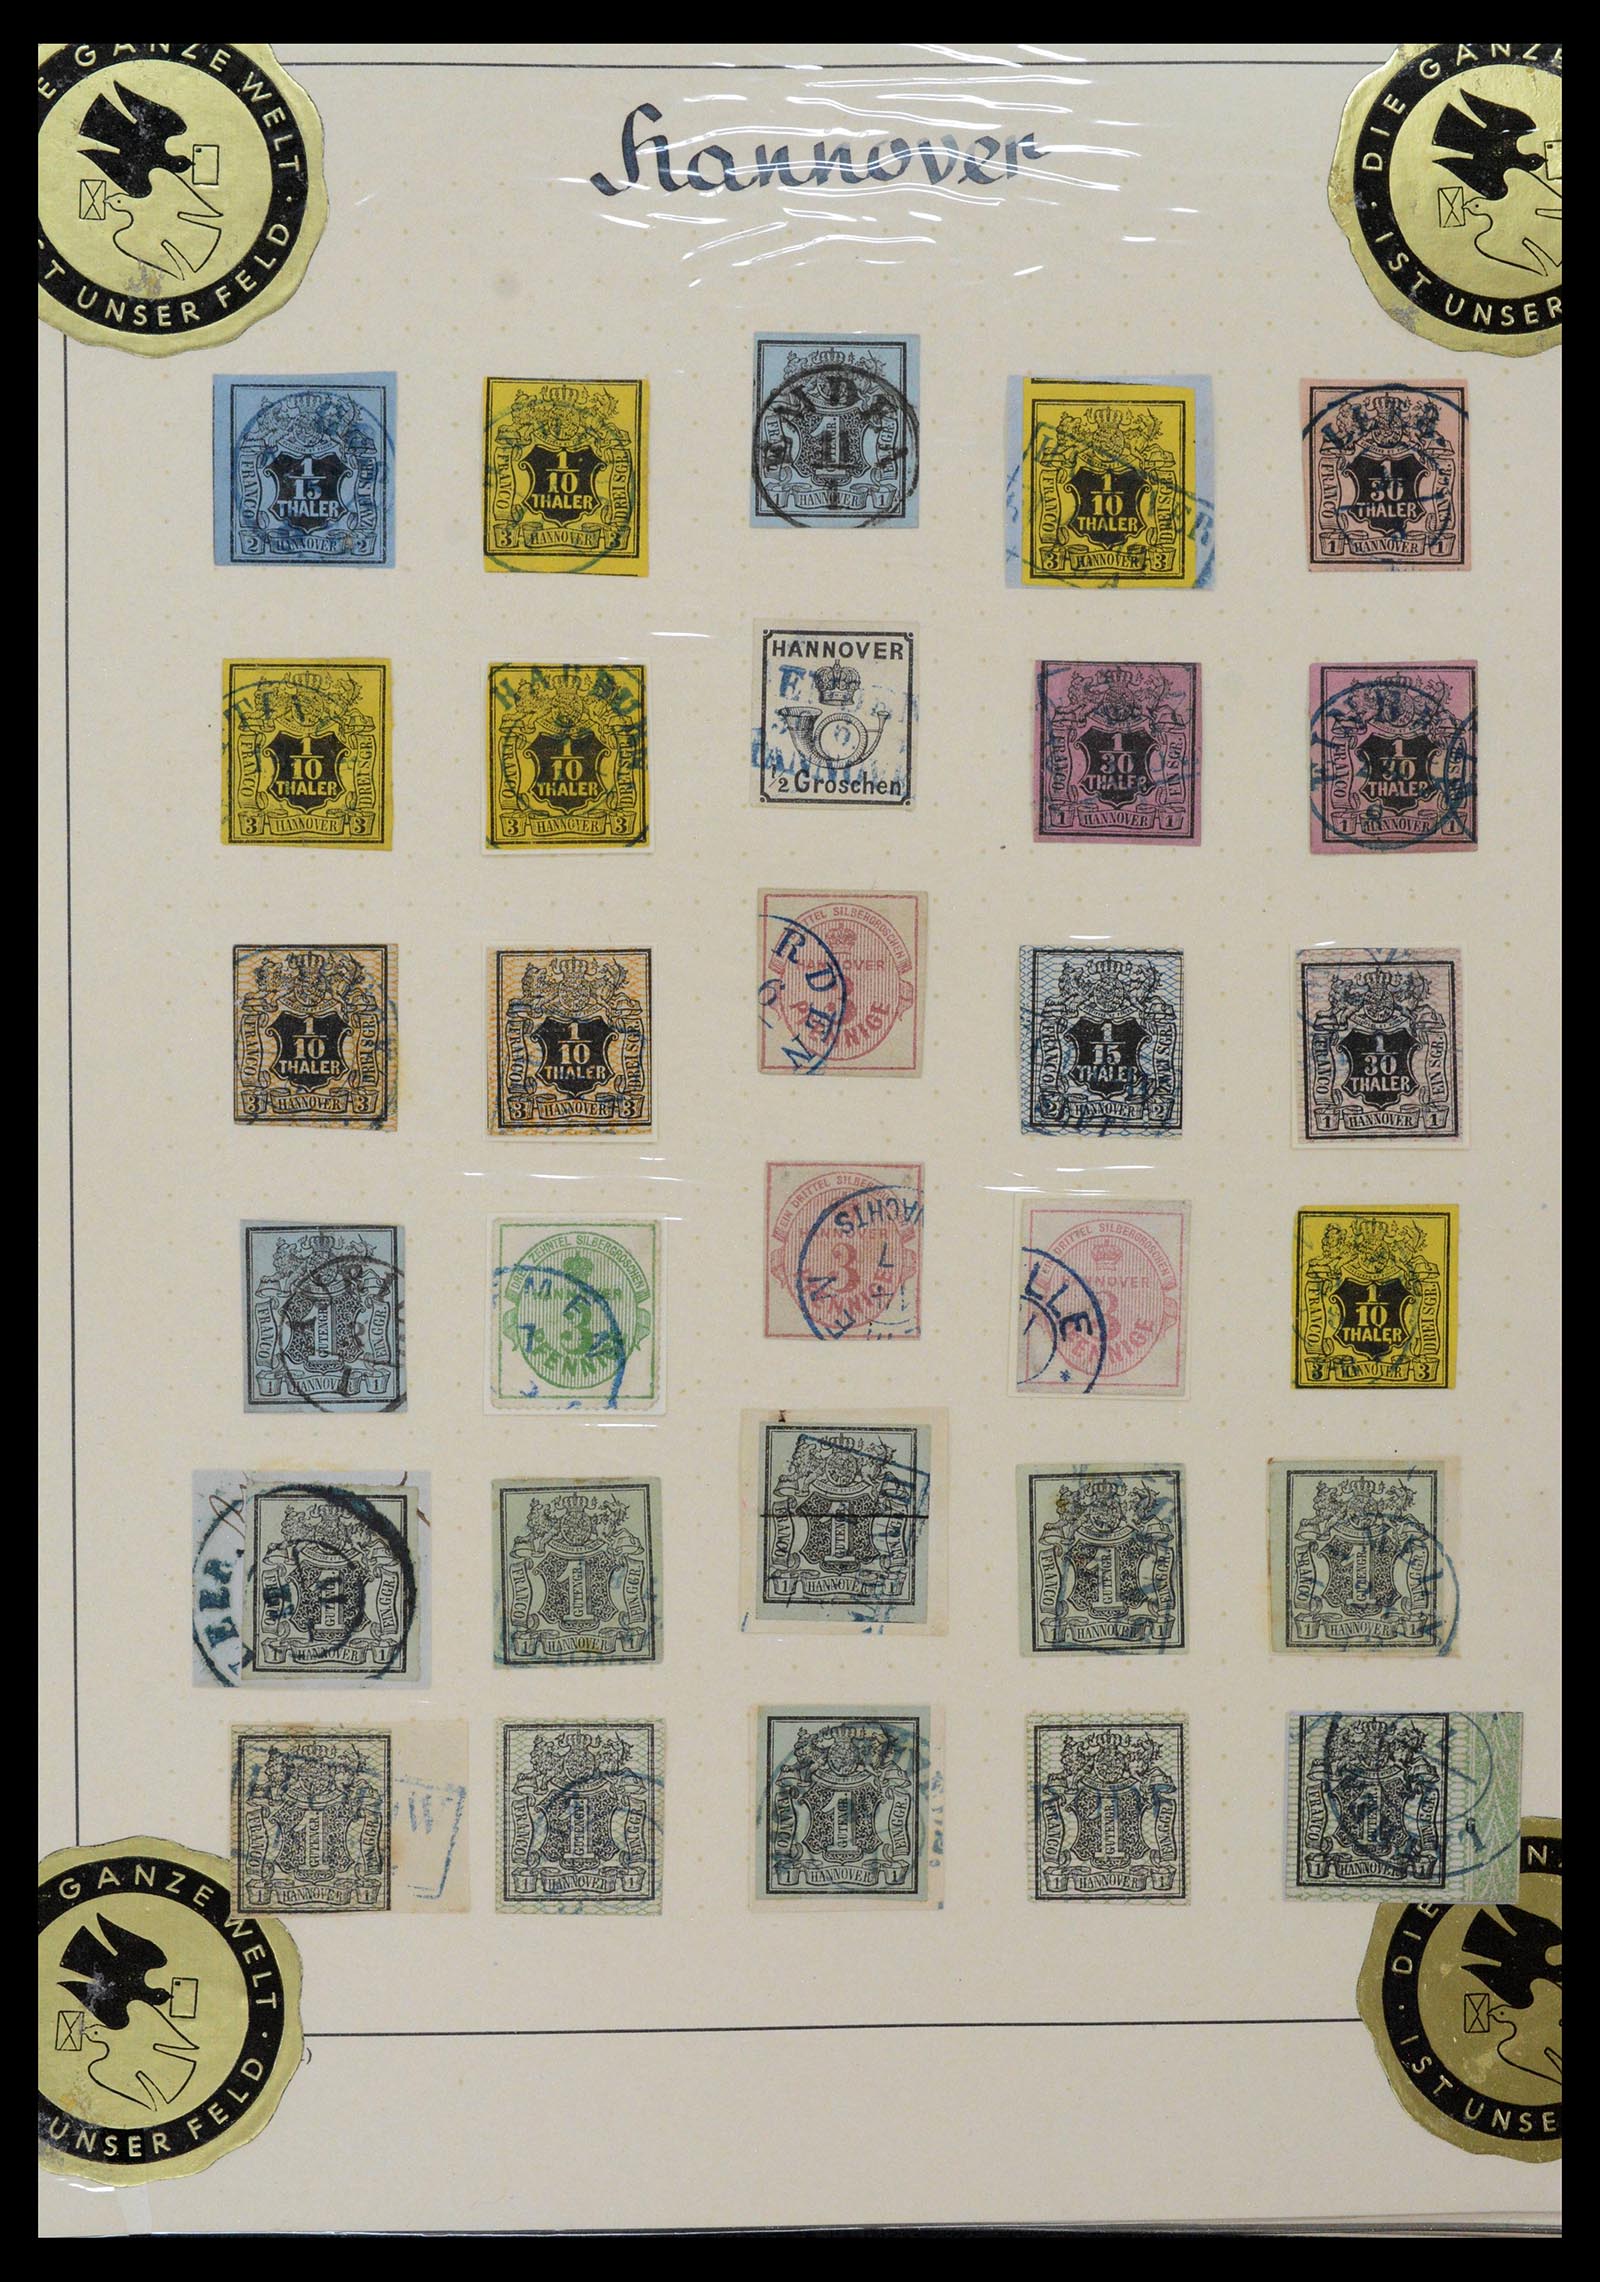 39200 0007 - Stamp collection 39200 Hannover SUPER collection 1850-1864.